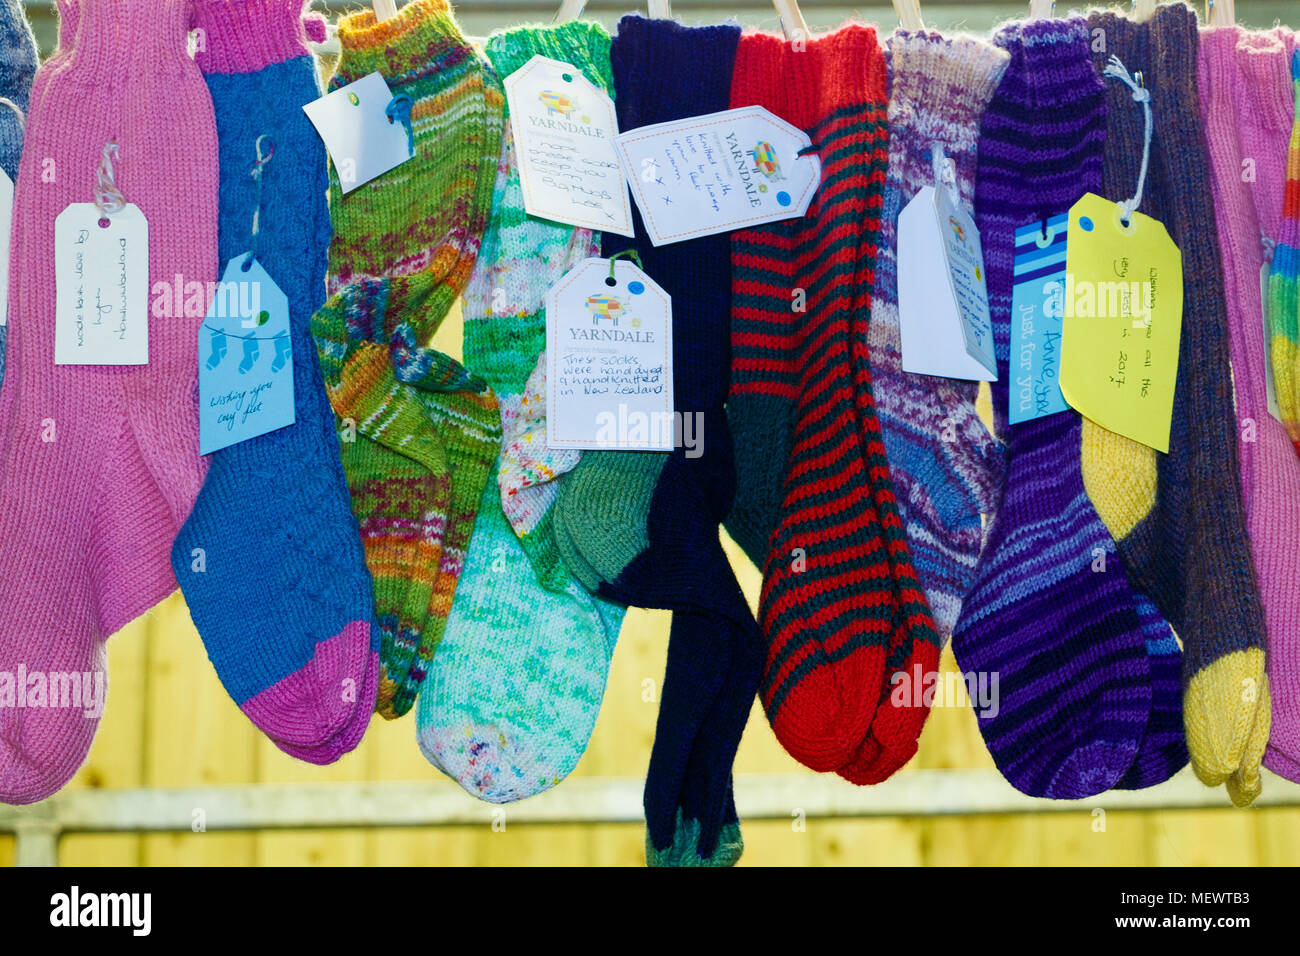 Part of the Winwick Mum Sock Line, donated by craft knitters to be passed on to those in need. Yarndale, Skipton, North Yorkshire, UK. Stock Photo